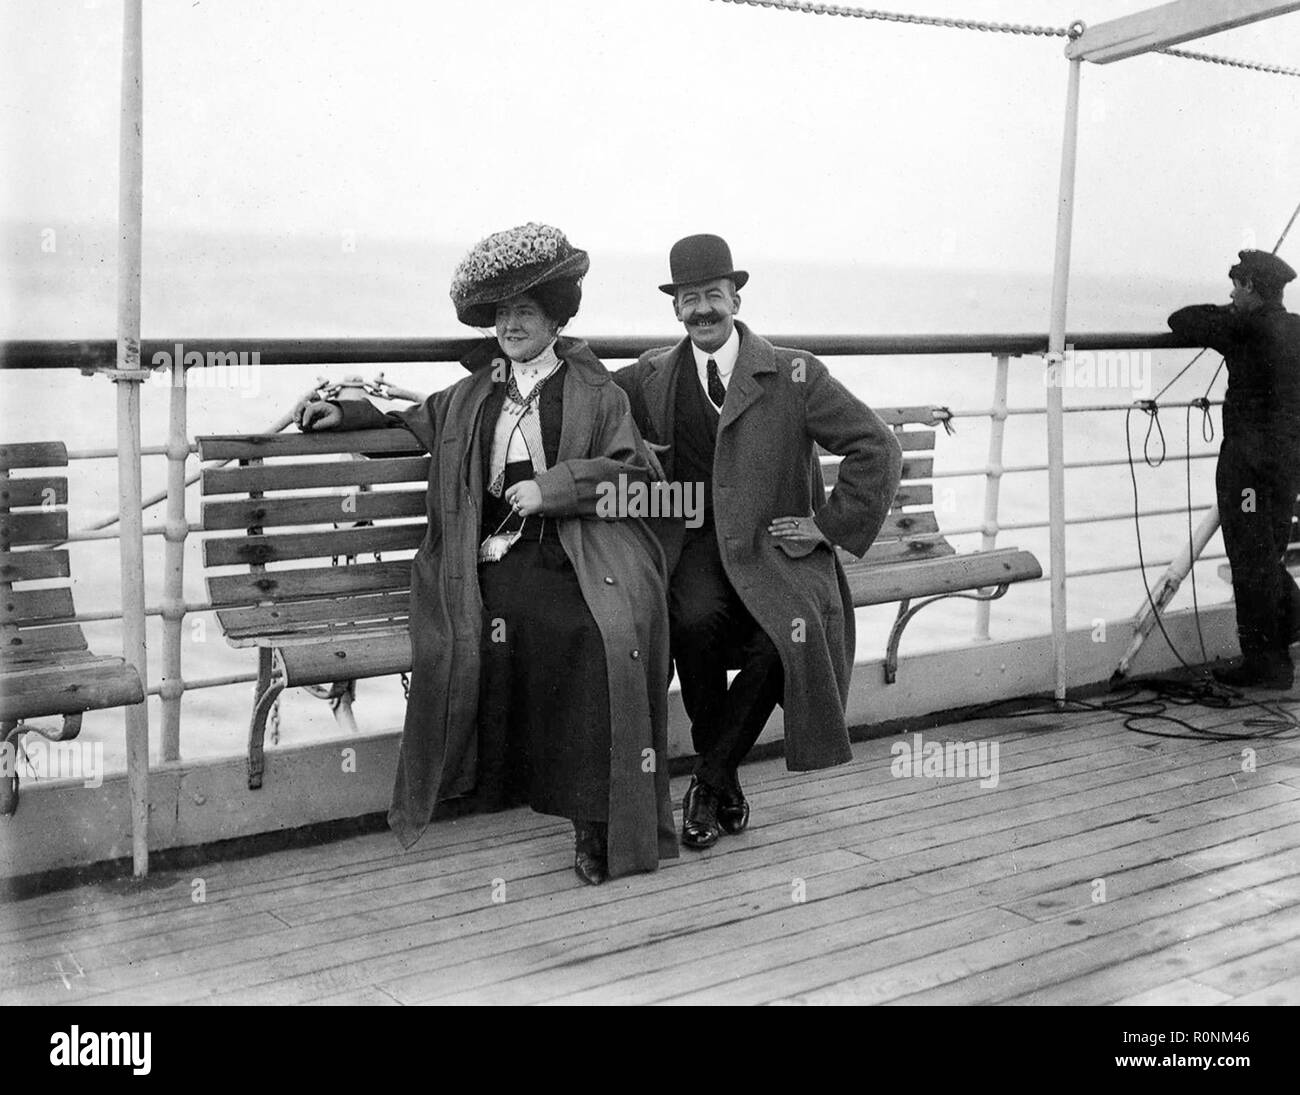 Passengers aboard the deck of the British passenger steamer SS Oronsa in 1911. The Oronsa was sunk after being torpedoed by a German submarine in 1918. Stock Photo